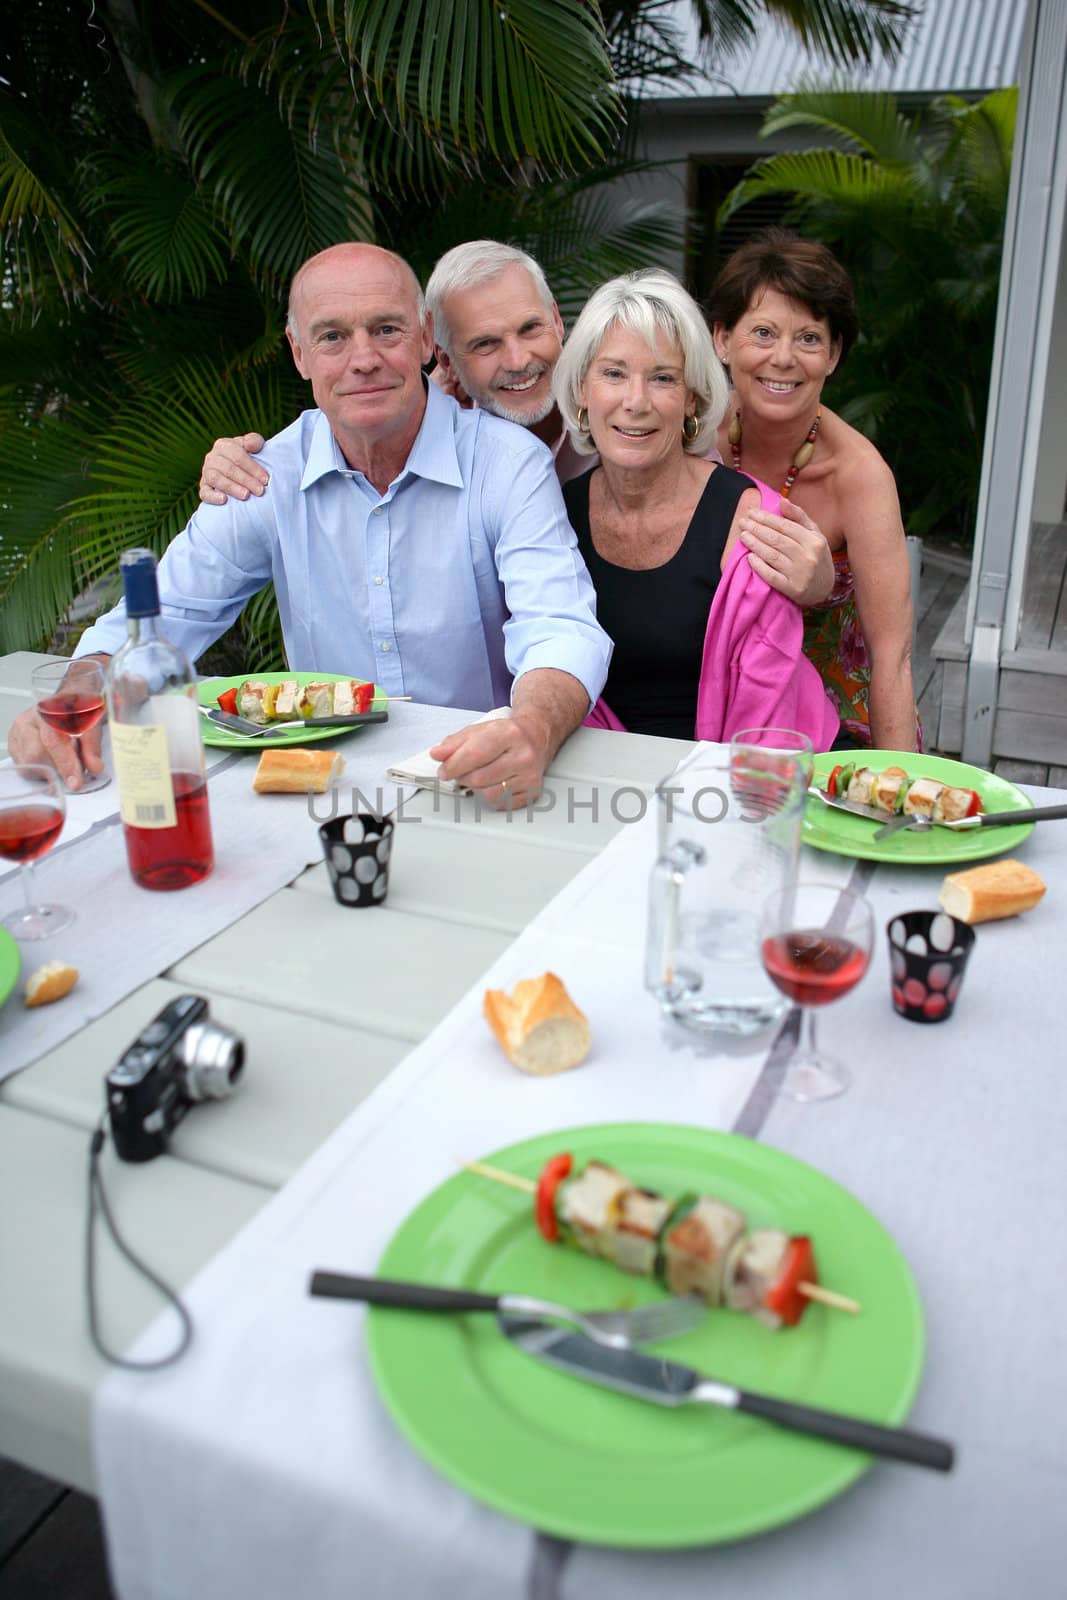 Friends posing for a photo during a barbecue by phovoir